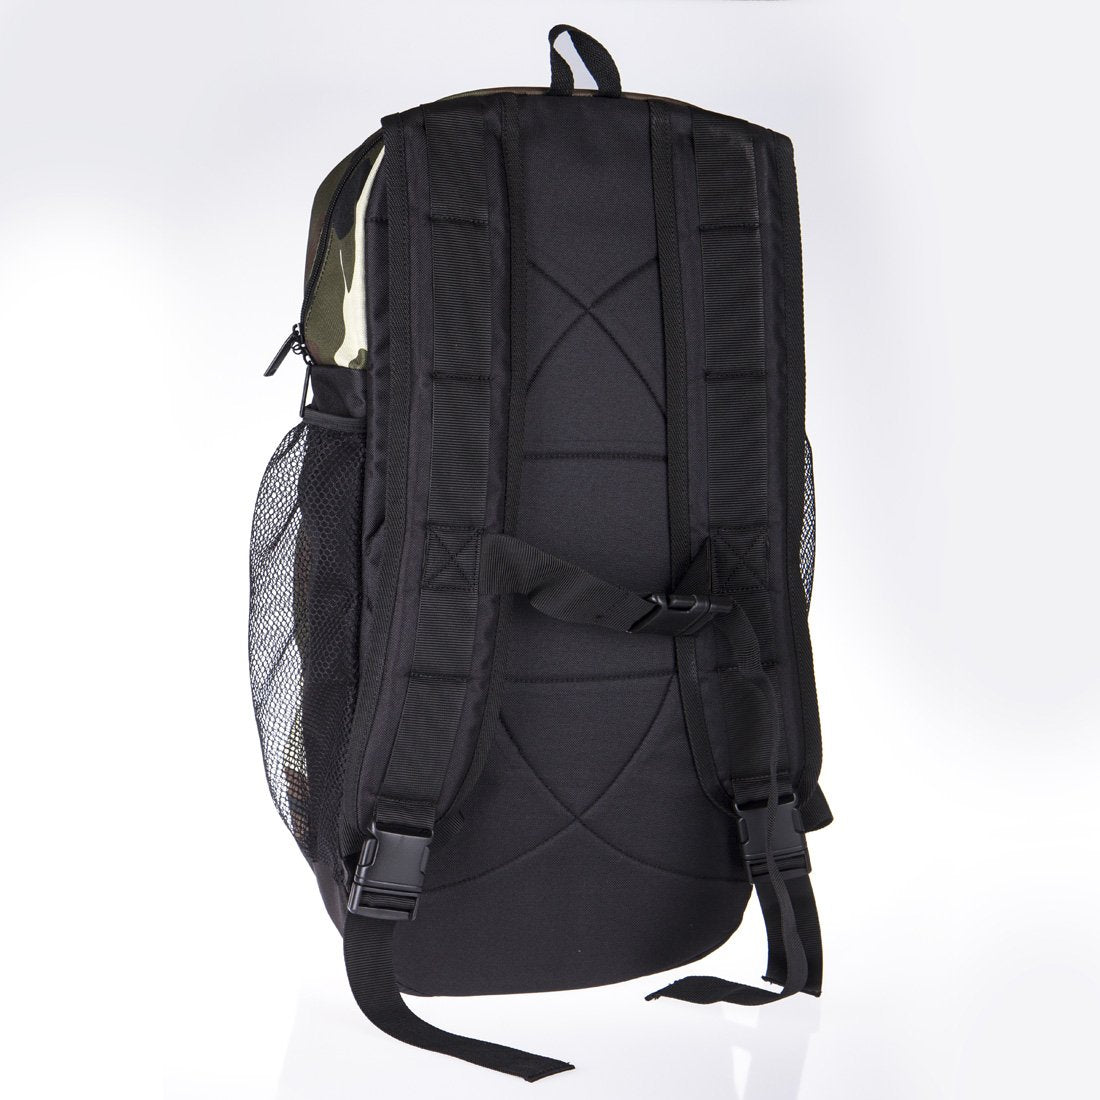 Fighters Large Backpack